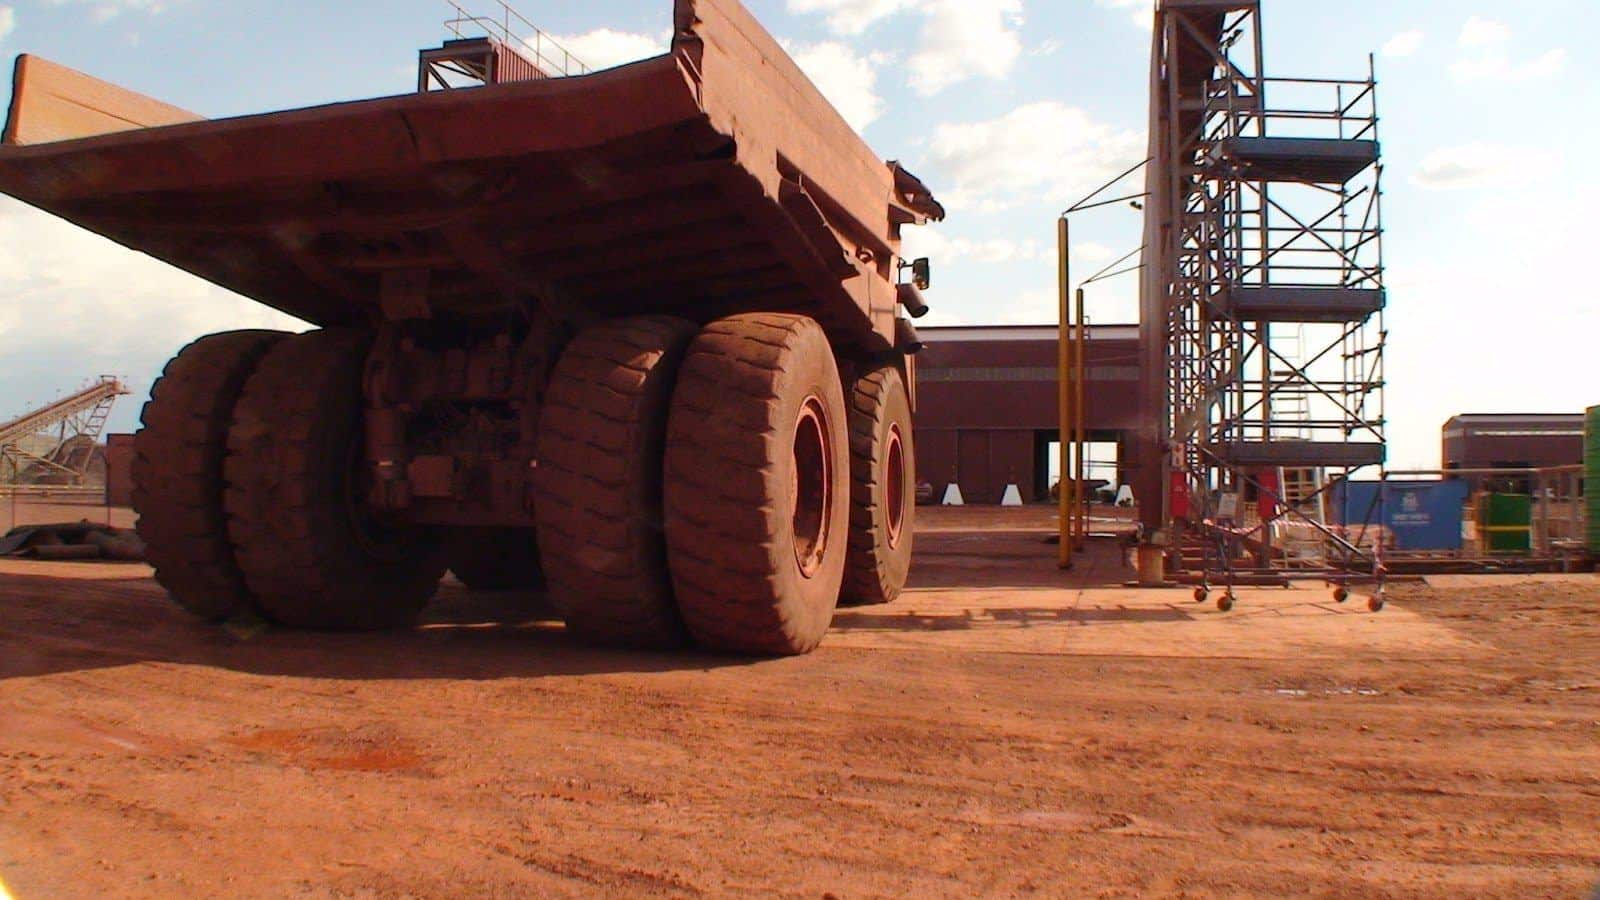 A mining vehicle covered in dirt